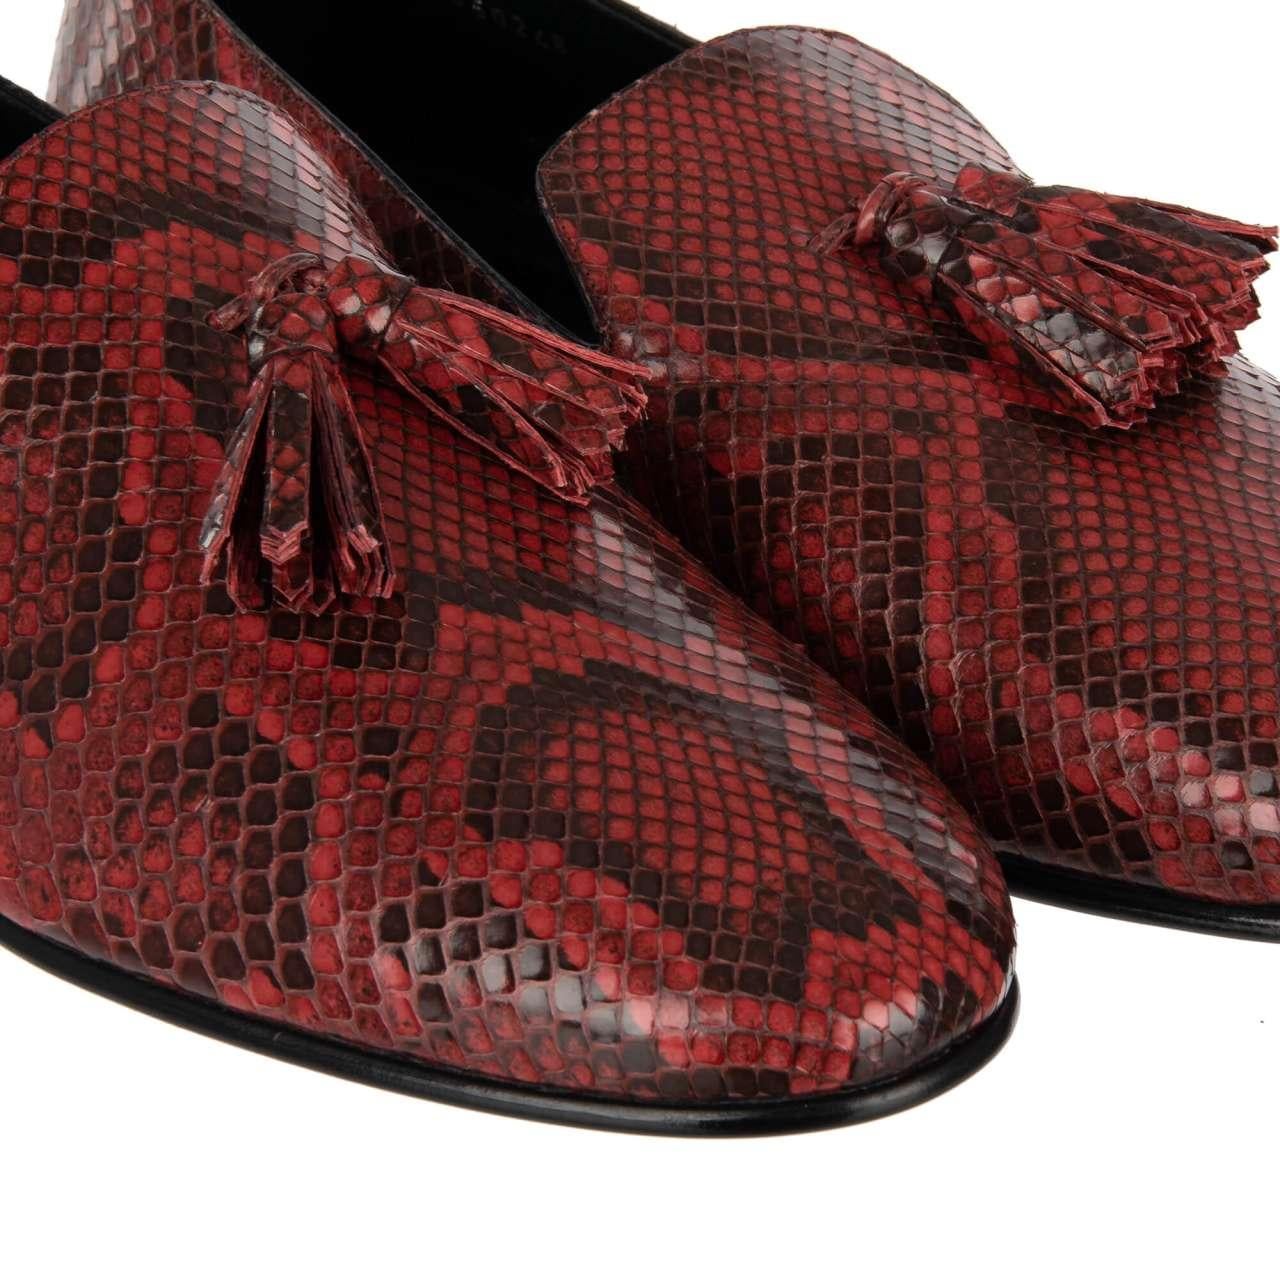 - Snake skin loafer shoes YOUNG POPE with tassels in red by DOLCE & GABBANA - MADE IN ITALY - Former RRP: UR 1.250 - New with Box - Model: A50248-A2043-8H309 - Material: 100% Snake skin - Sole: Leather - Color: Red - DG golden metal logo on the side